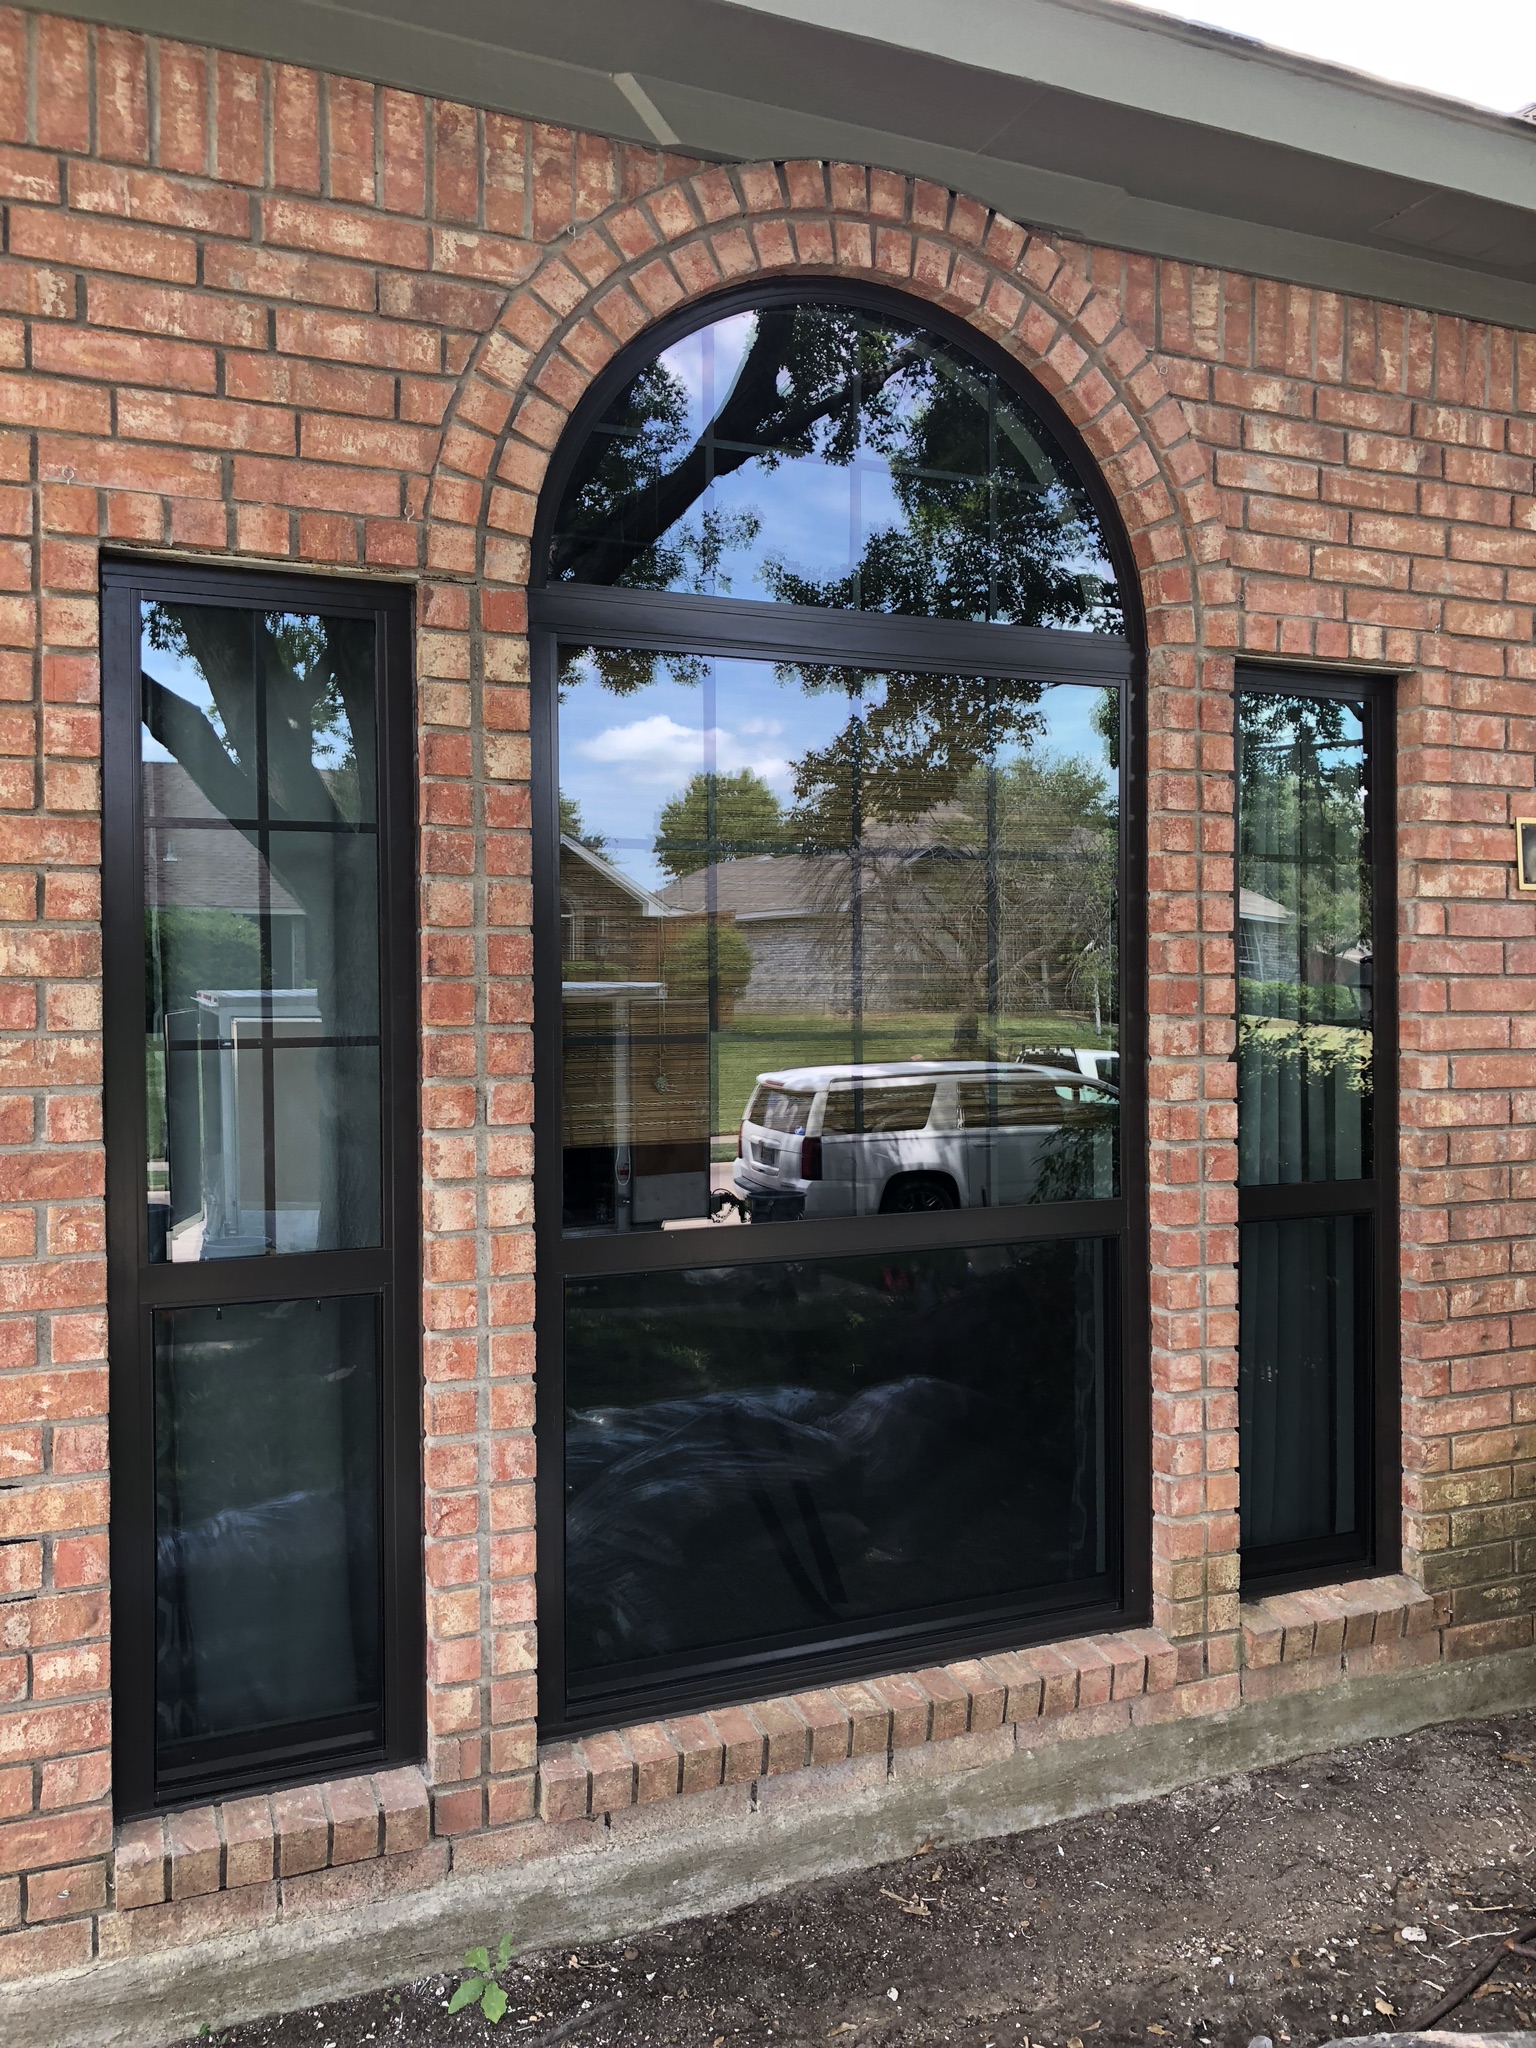 Don Young Company Aluminum Thermal Break Replacement Windows in Bronze Color